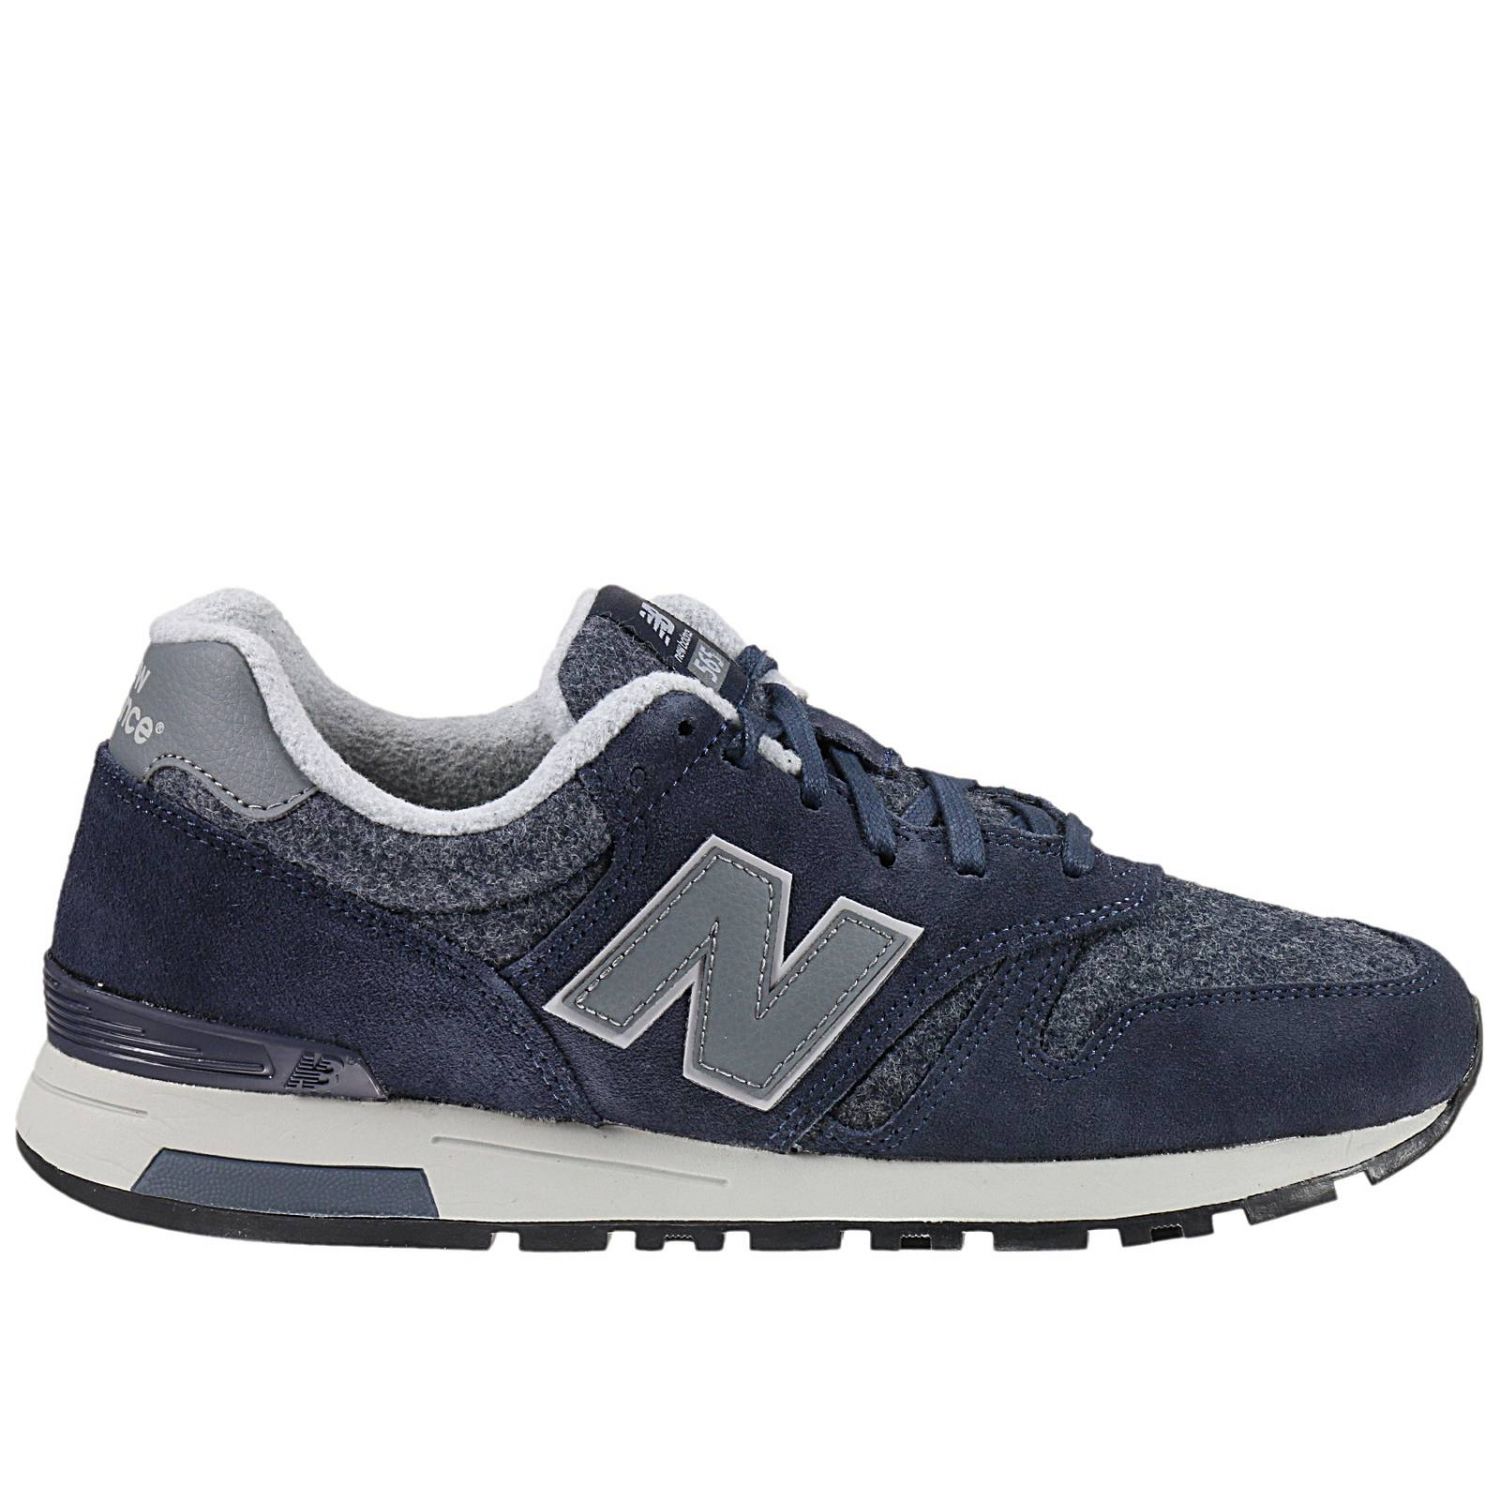 New Balance Outlet: Shoes man | Trainers New Balance Men Blue ...